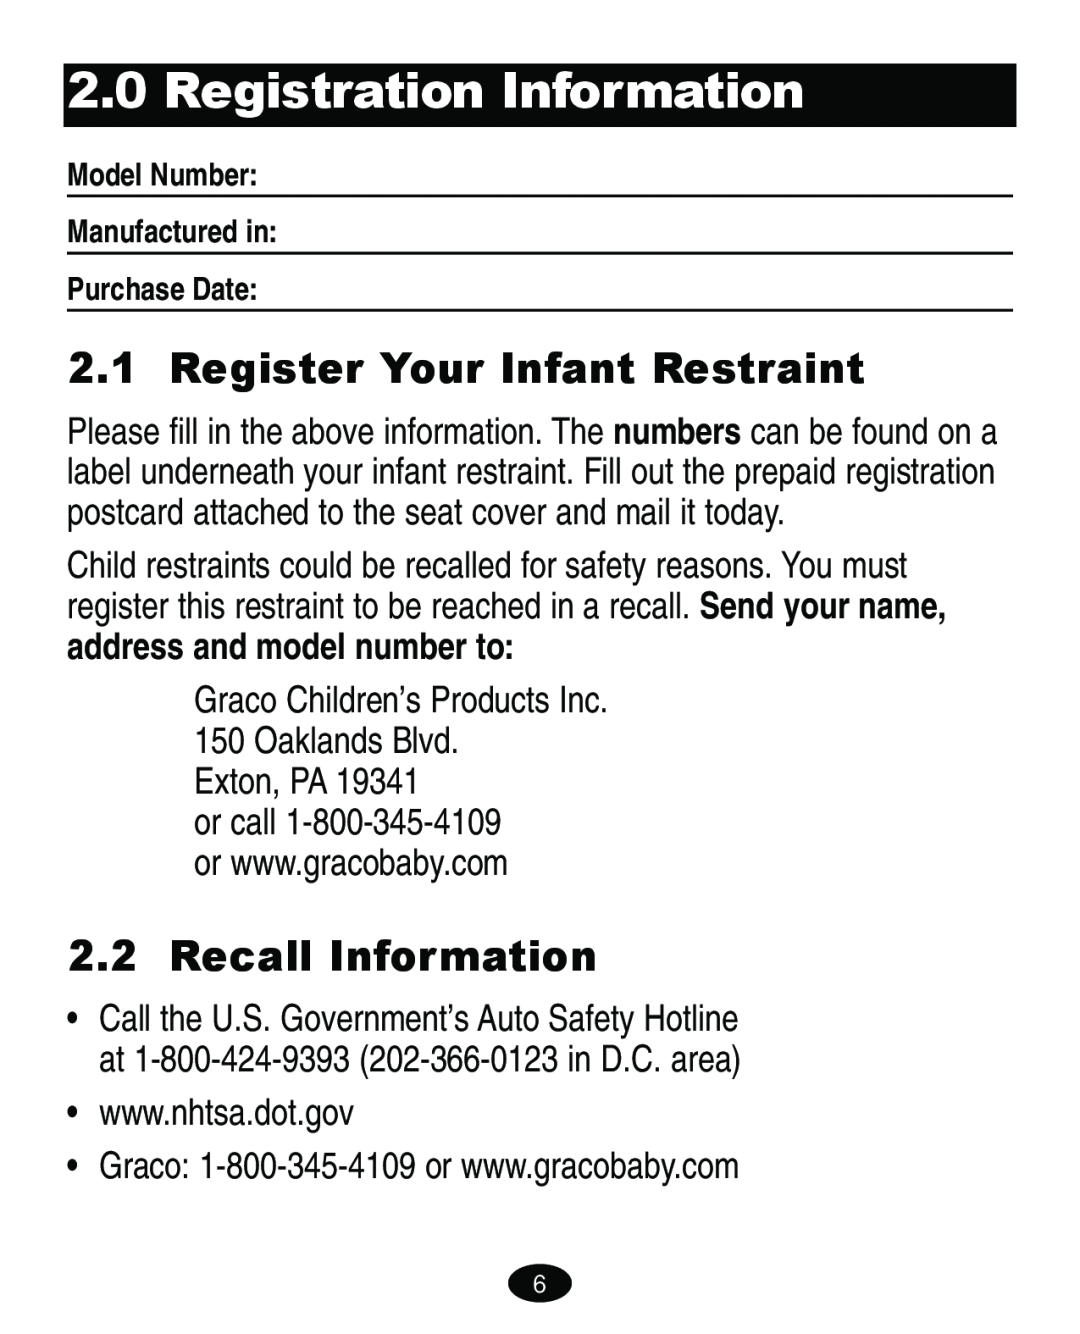 Graco ISPA108AB manual Registration Information, Register Your Infant Restraint, Recall Information, Exton, PA 